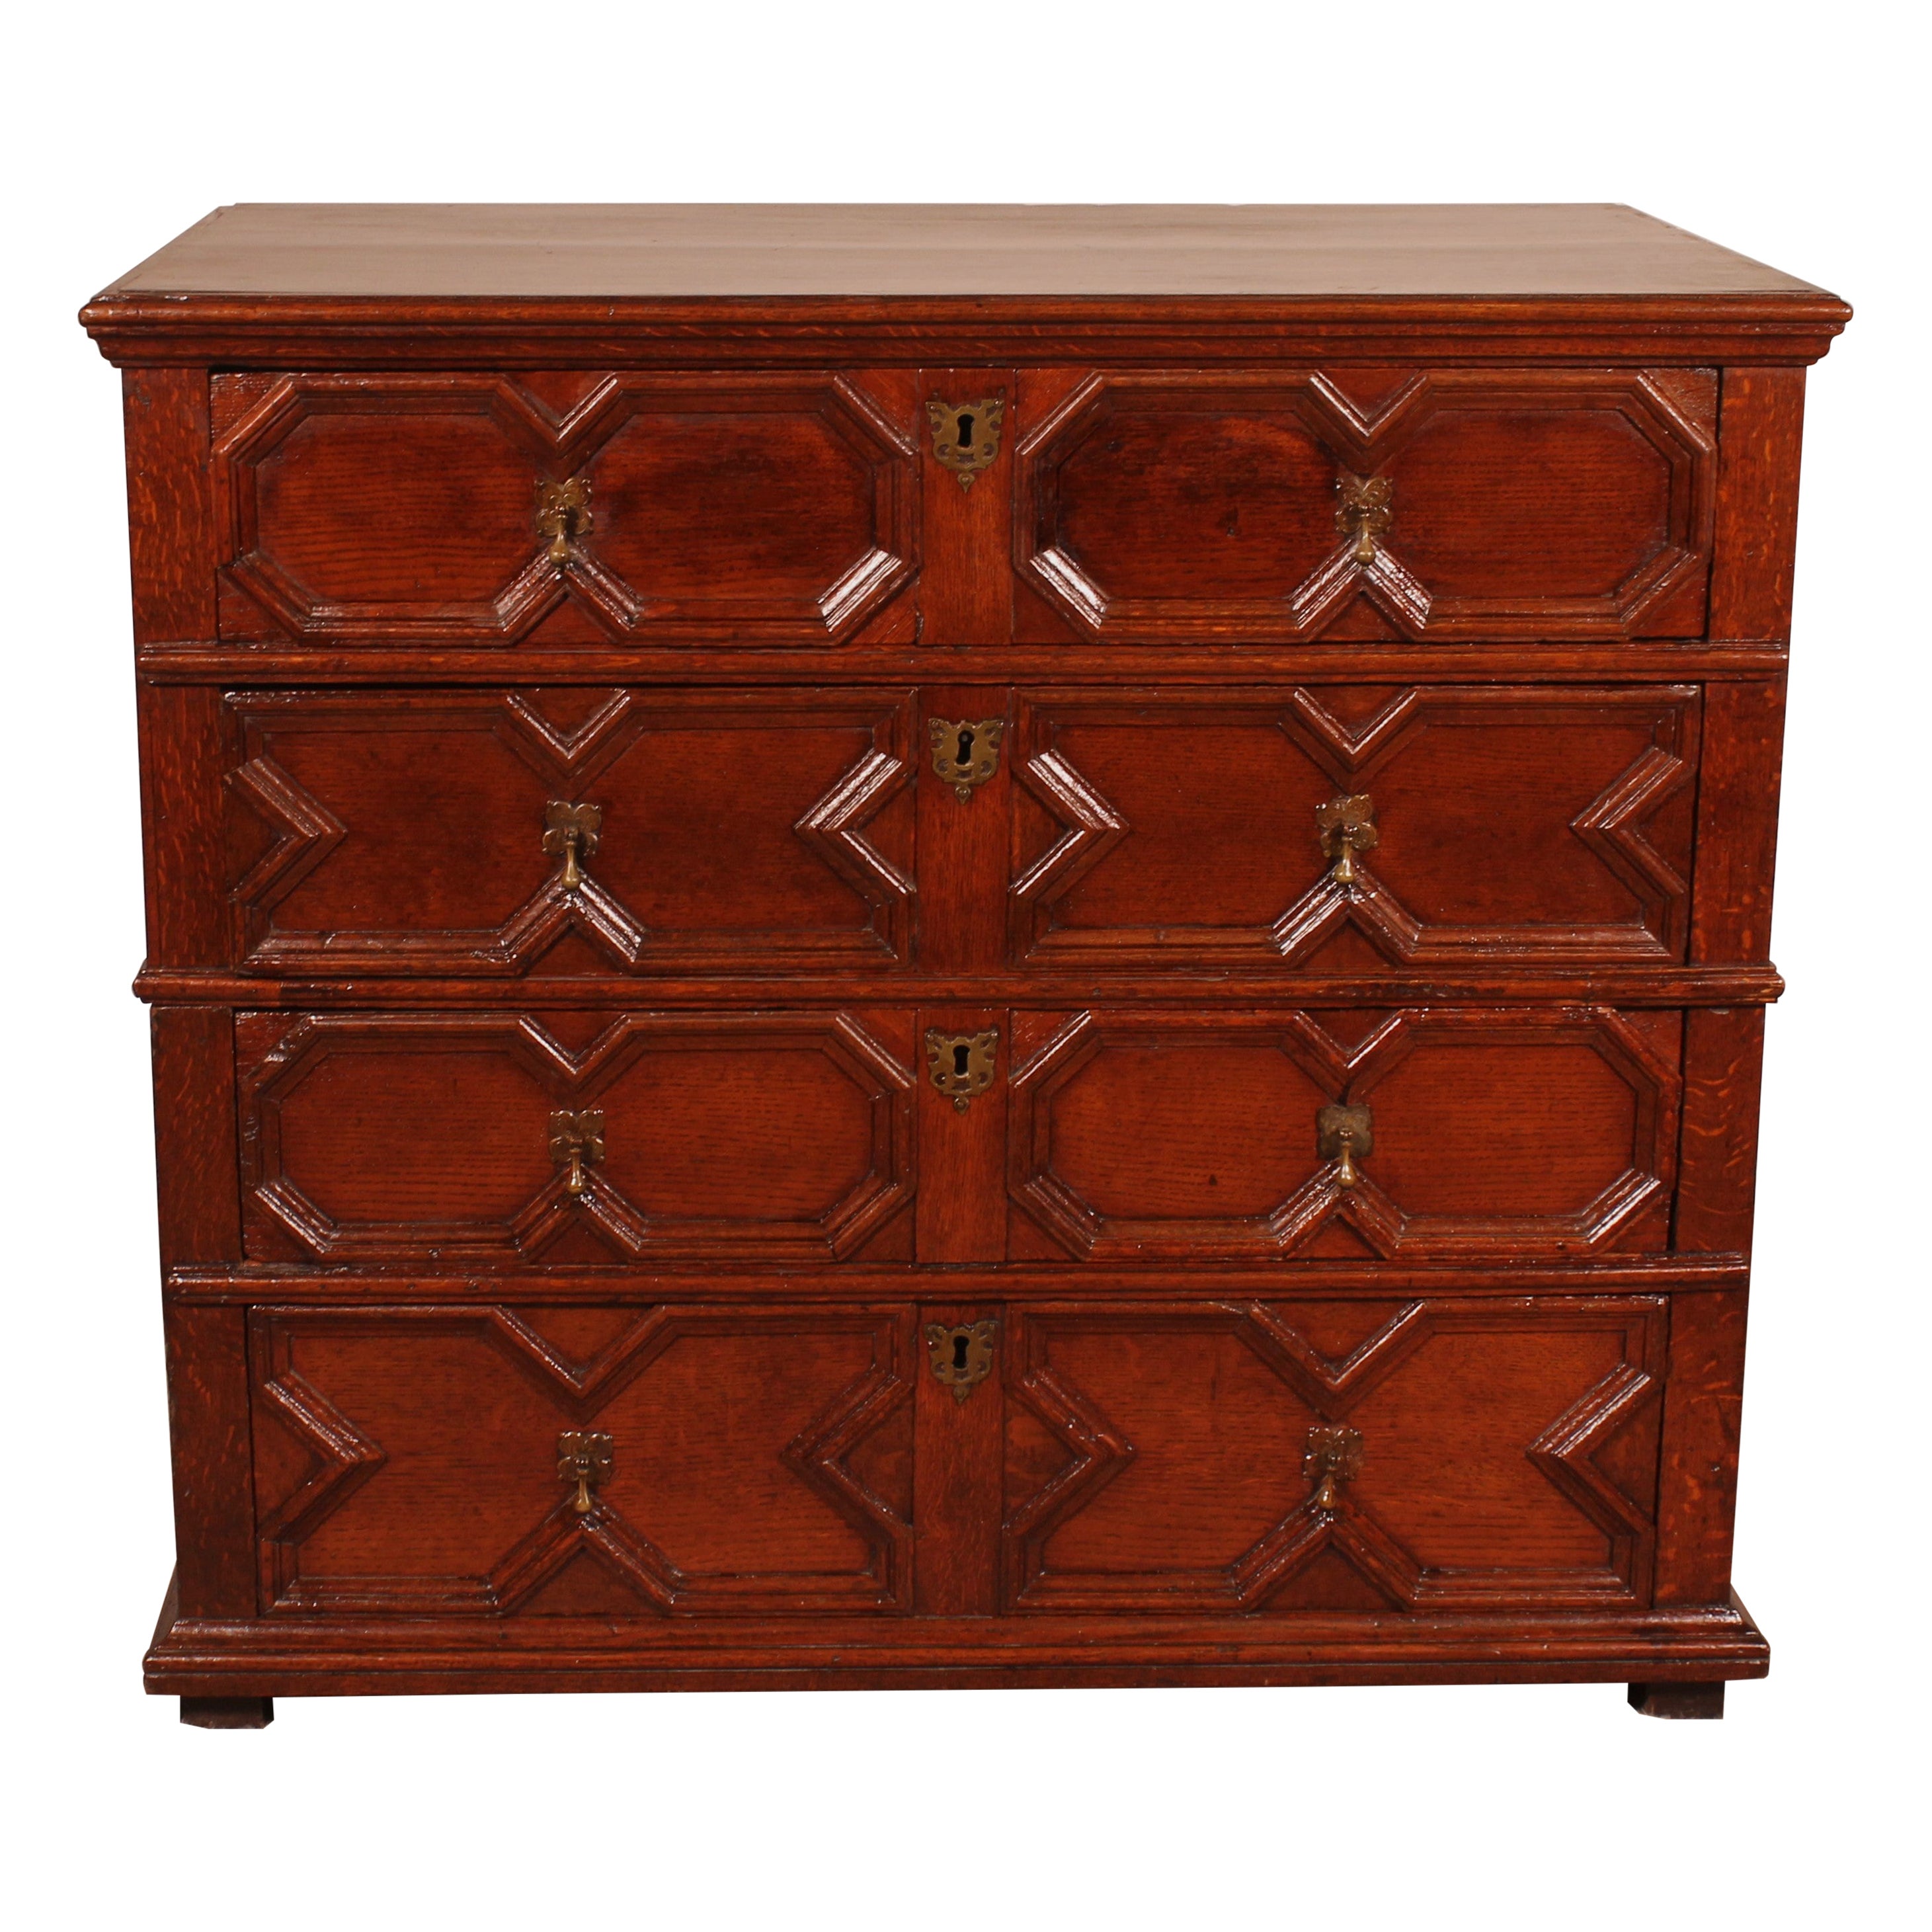 Jacobean Period Chest Of Drawers In Oak From The 17th Century For Sale